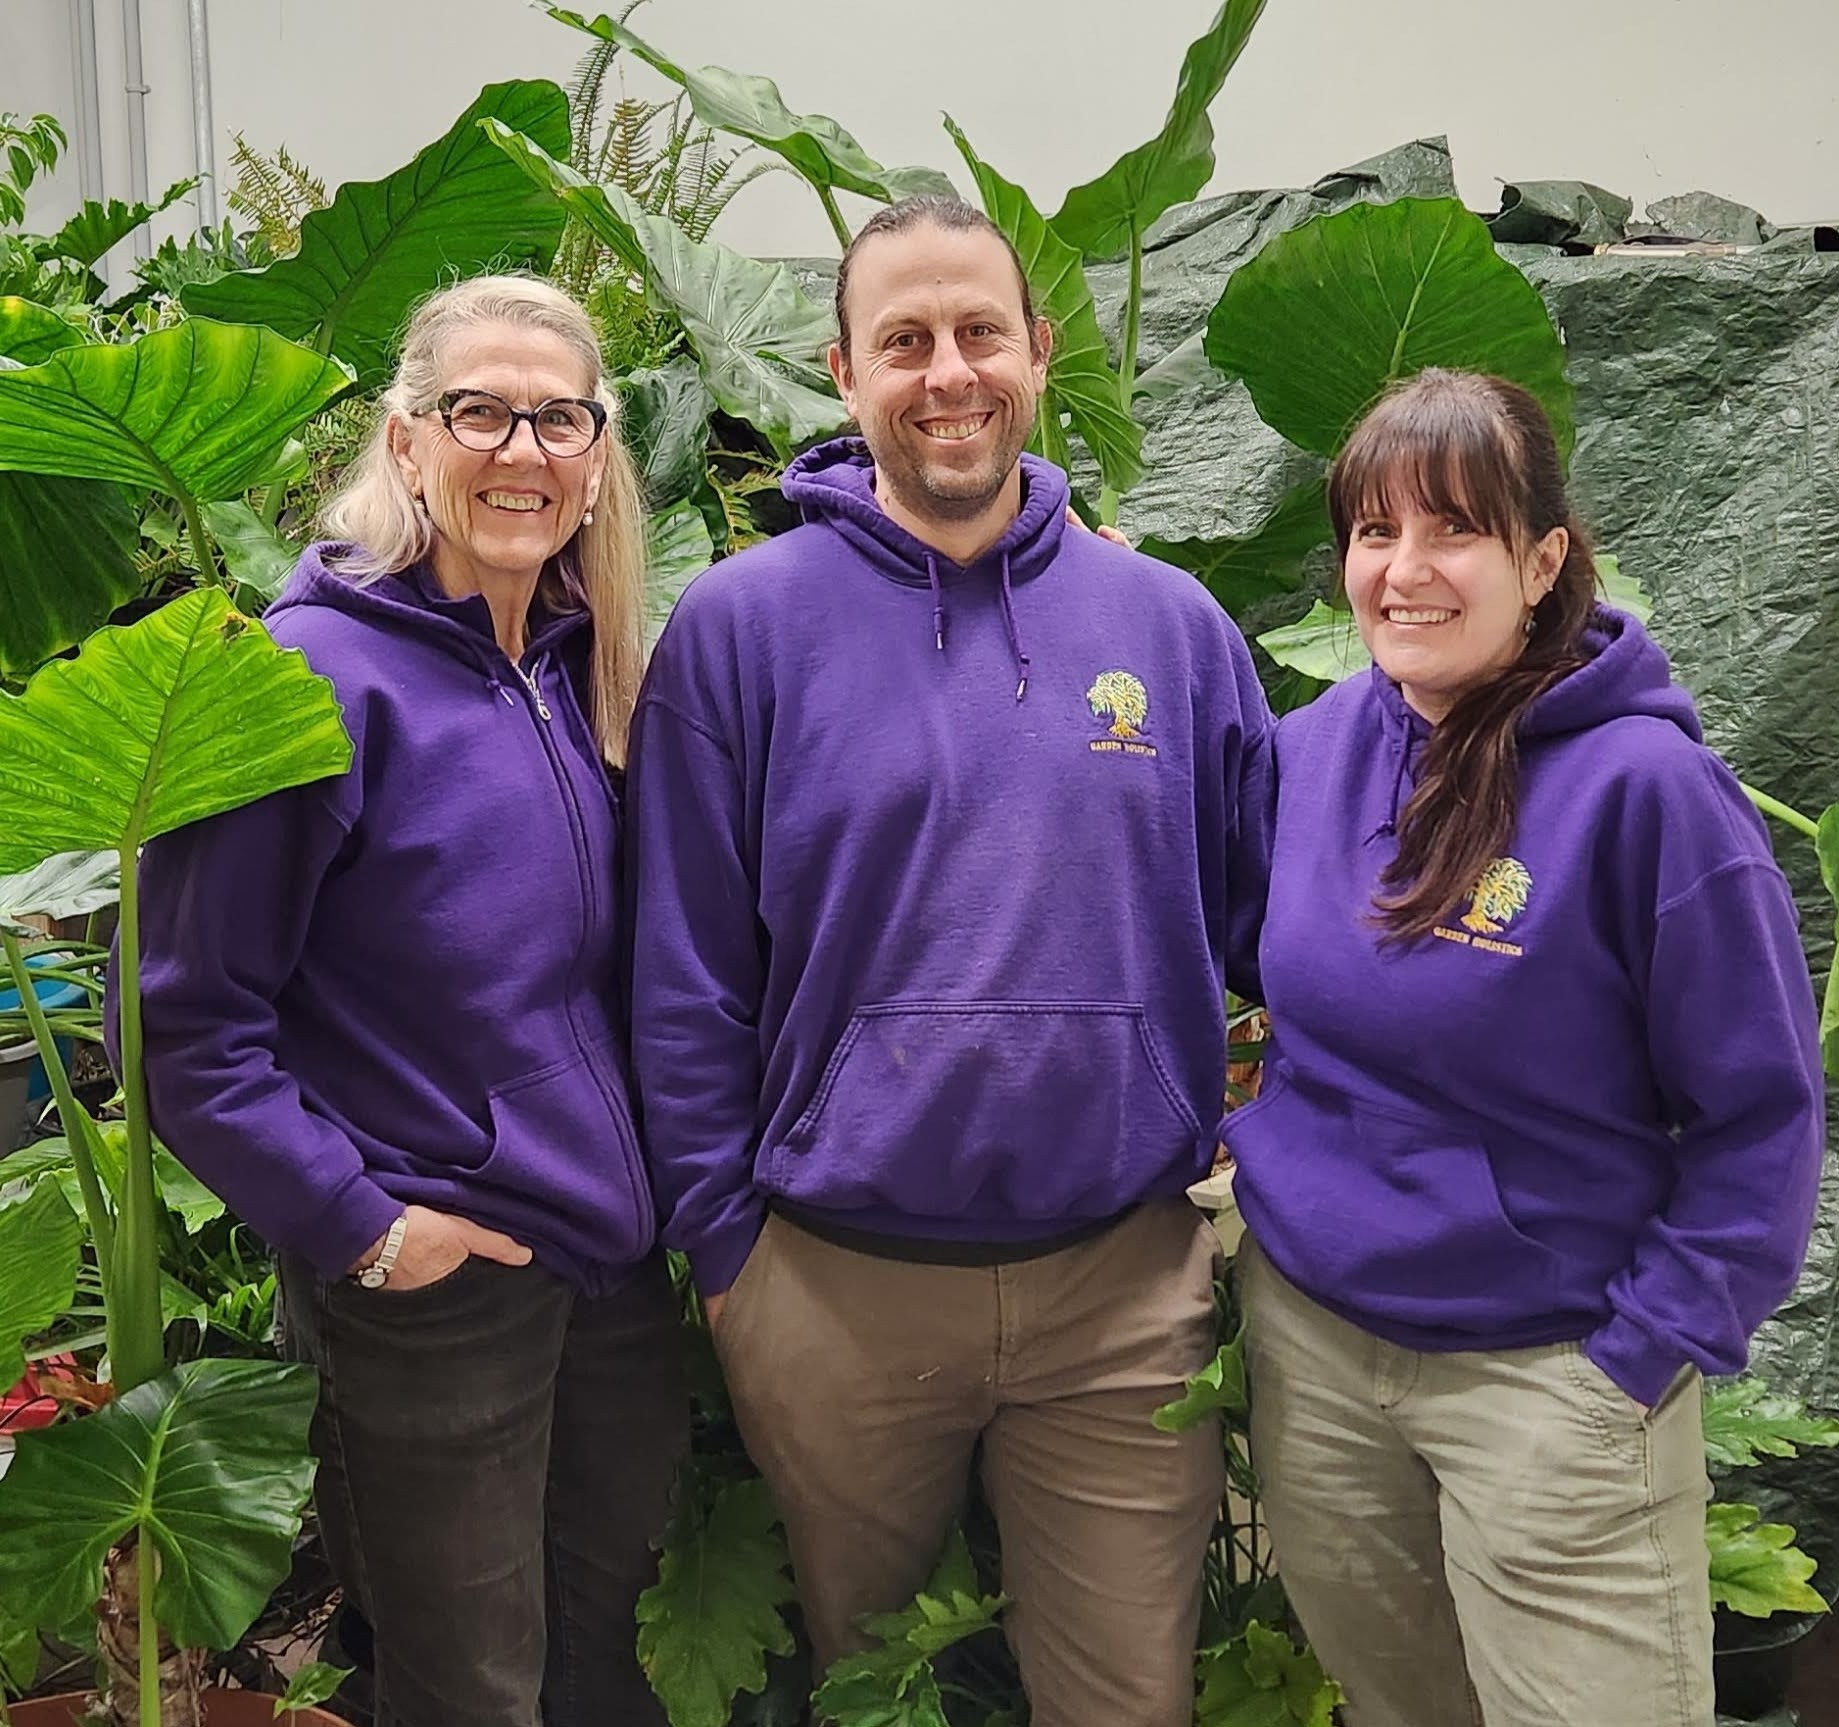 Three people are standing together smiling in a greenhouse, wearing matching purple hoodies with a logo, surrounded by large green leafy plants.